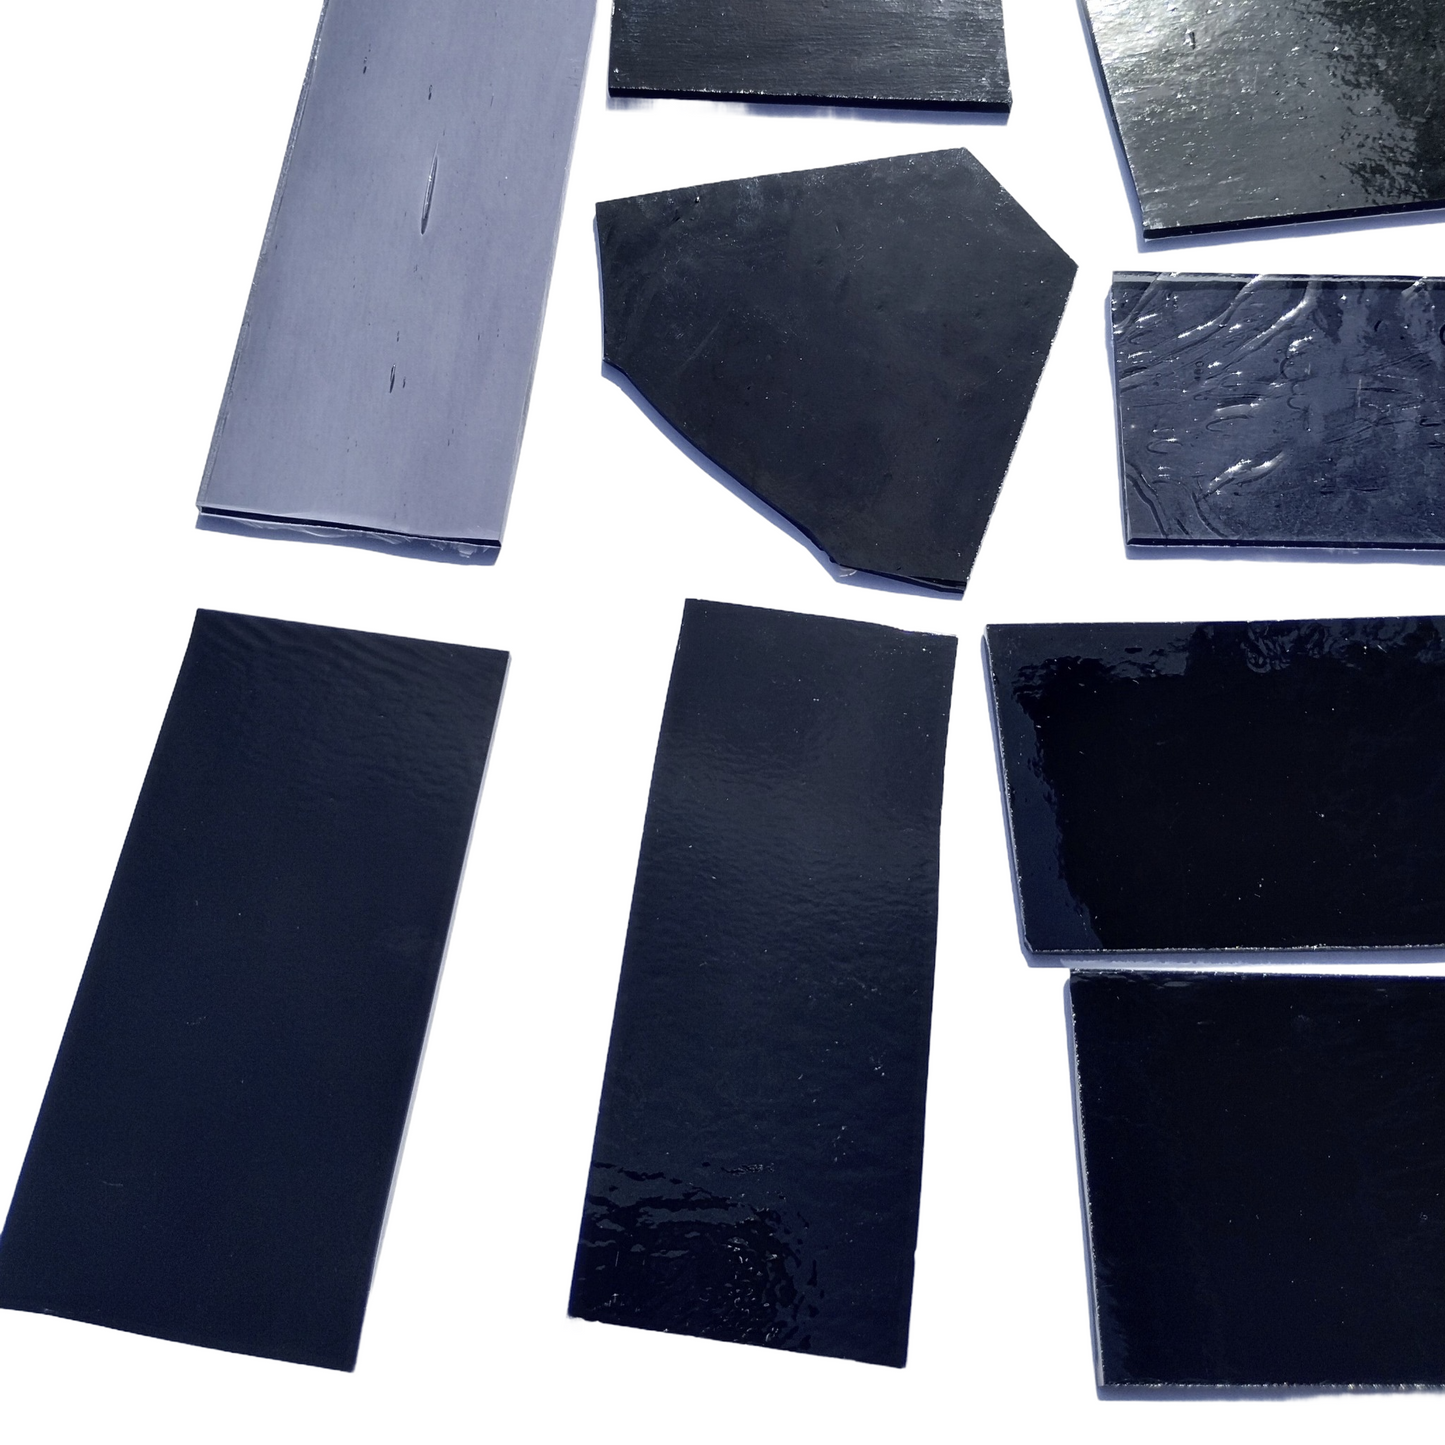 Assorted Black and Gray Stained Glass Scrap Pieces, Curated 1 lb Package. Hand picked, sorted by color, clean. Black, gray art glass assortment perfect for stained glass and mosaic art. Ships carefully in 1 business day. Free shipping available.